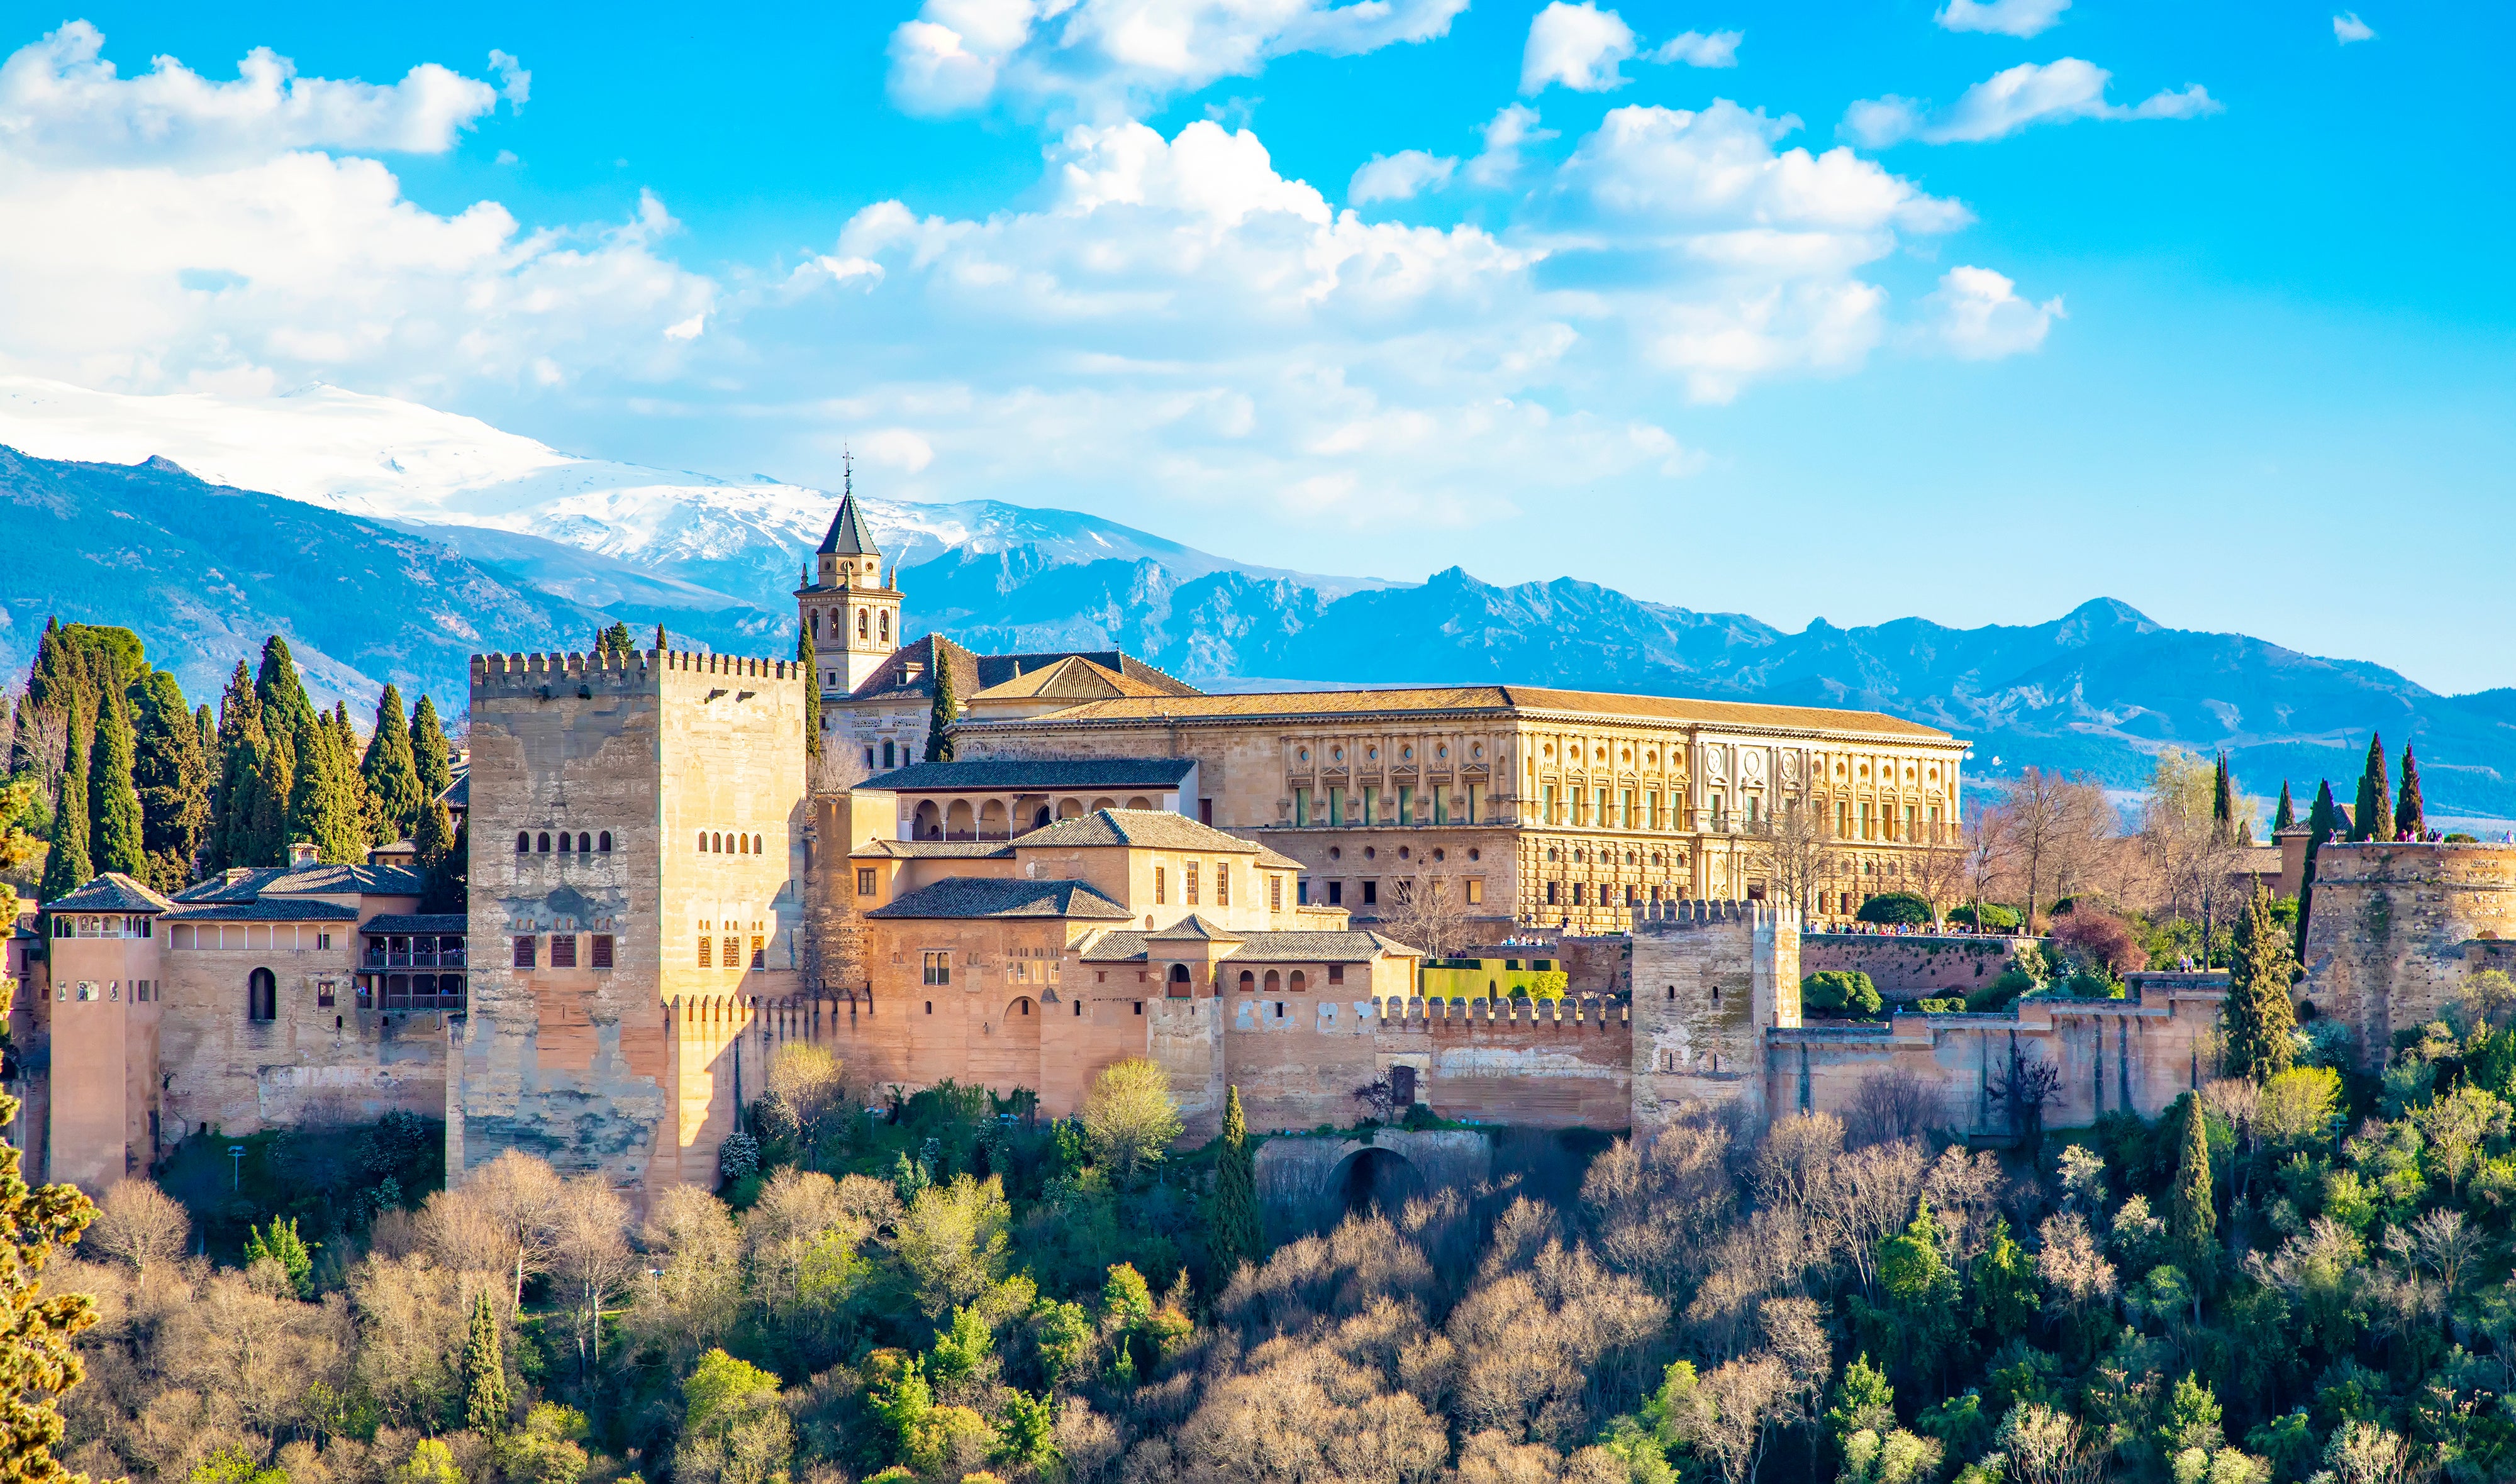 <p>Palace, fortress and citadel: the Alhambra is Granada’s most recognisable attractions </p>